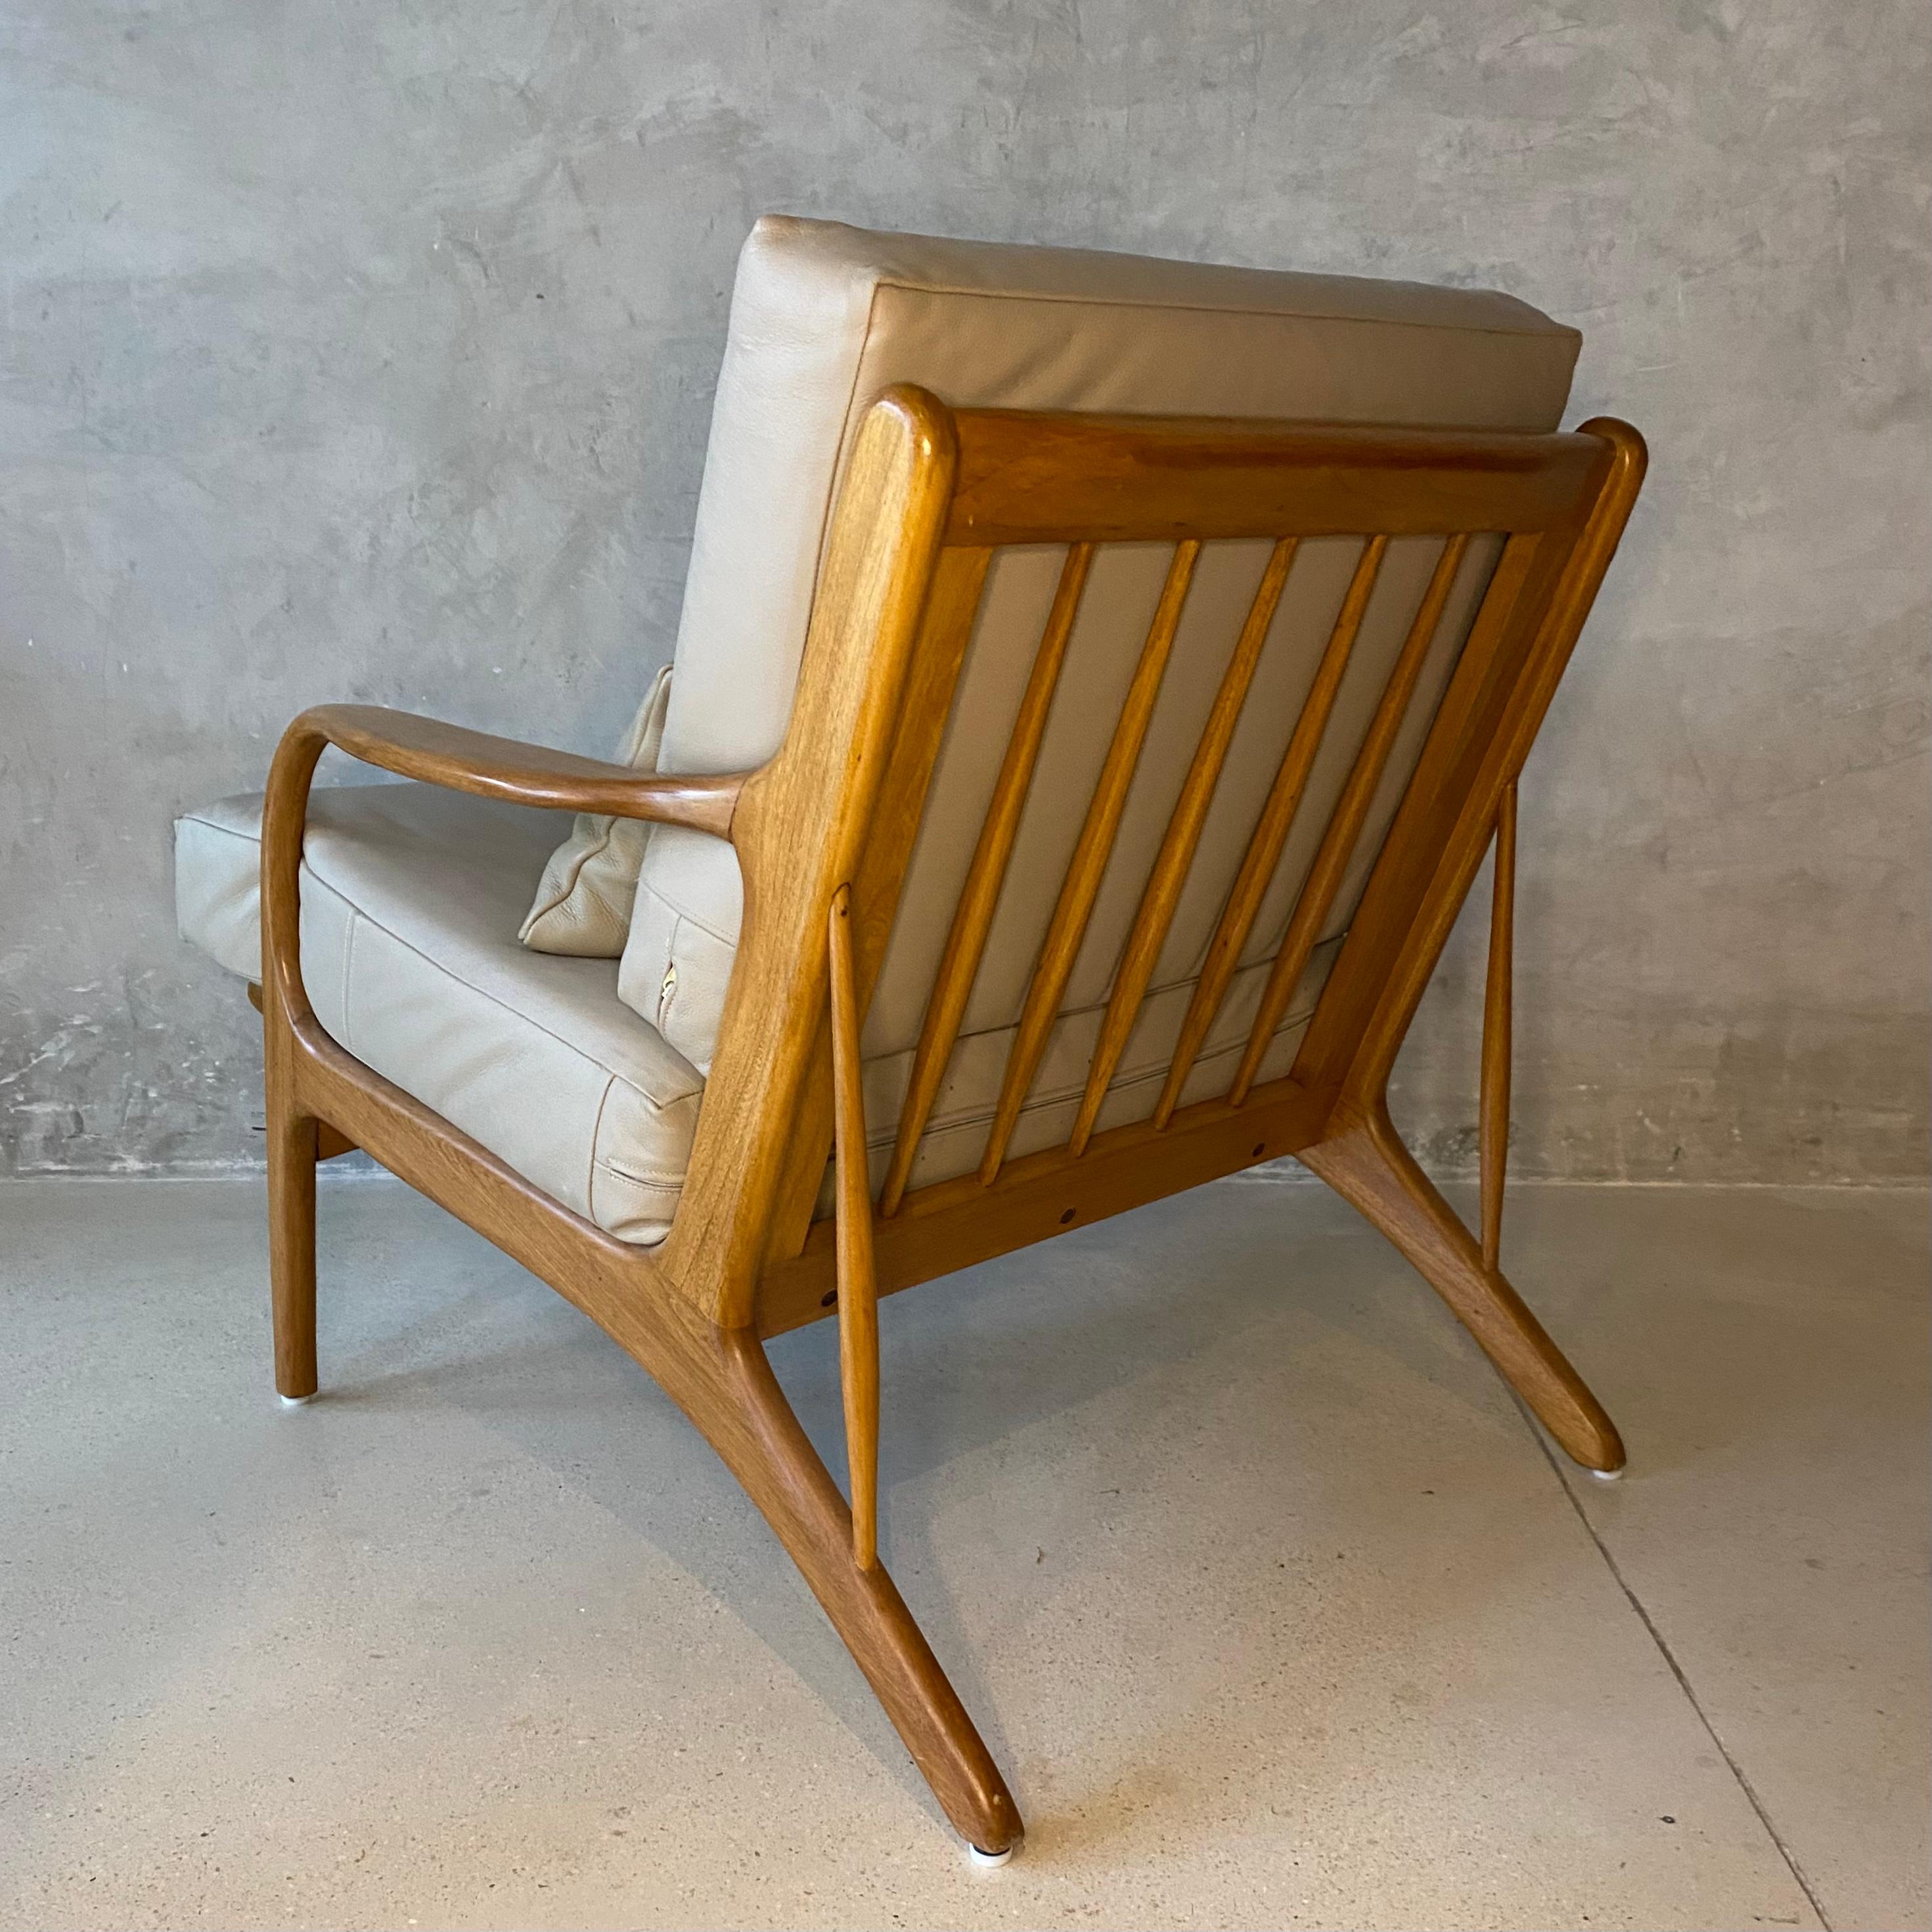 Leather Mexican Midcentury Lounge Chair, “Malinche“, 1950s For Sale